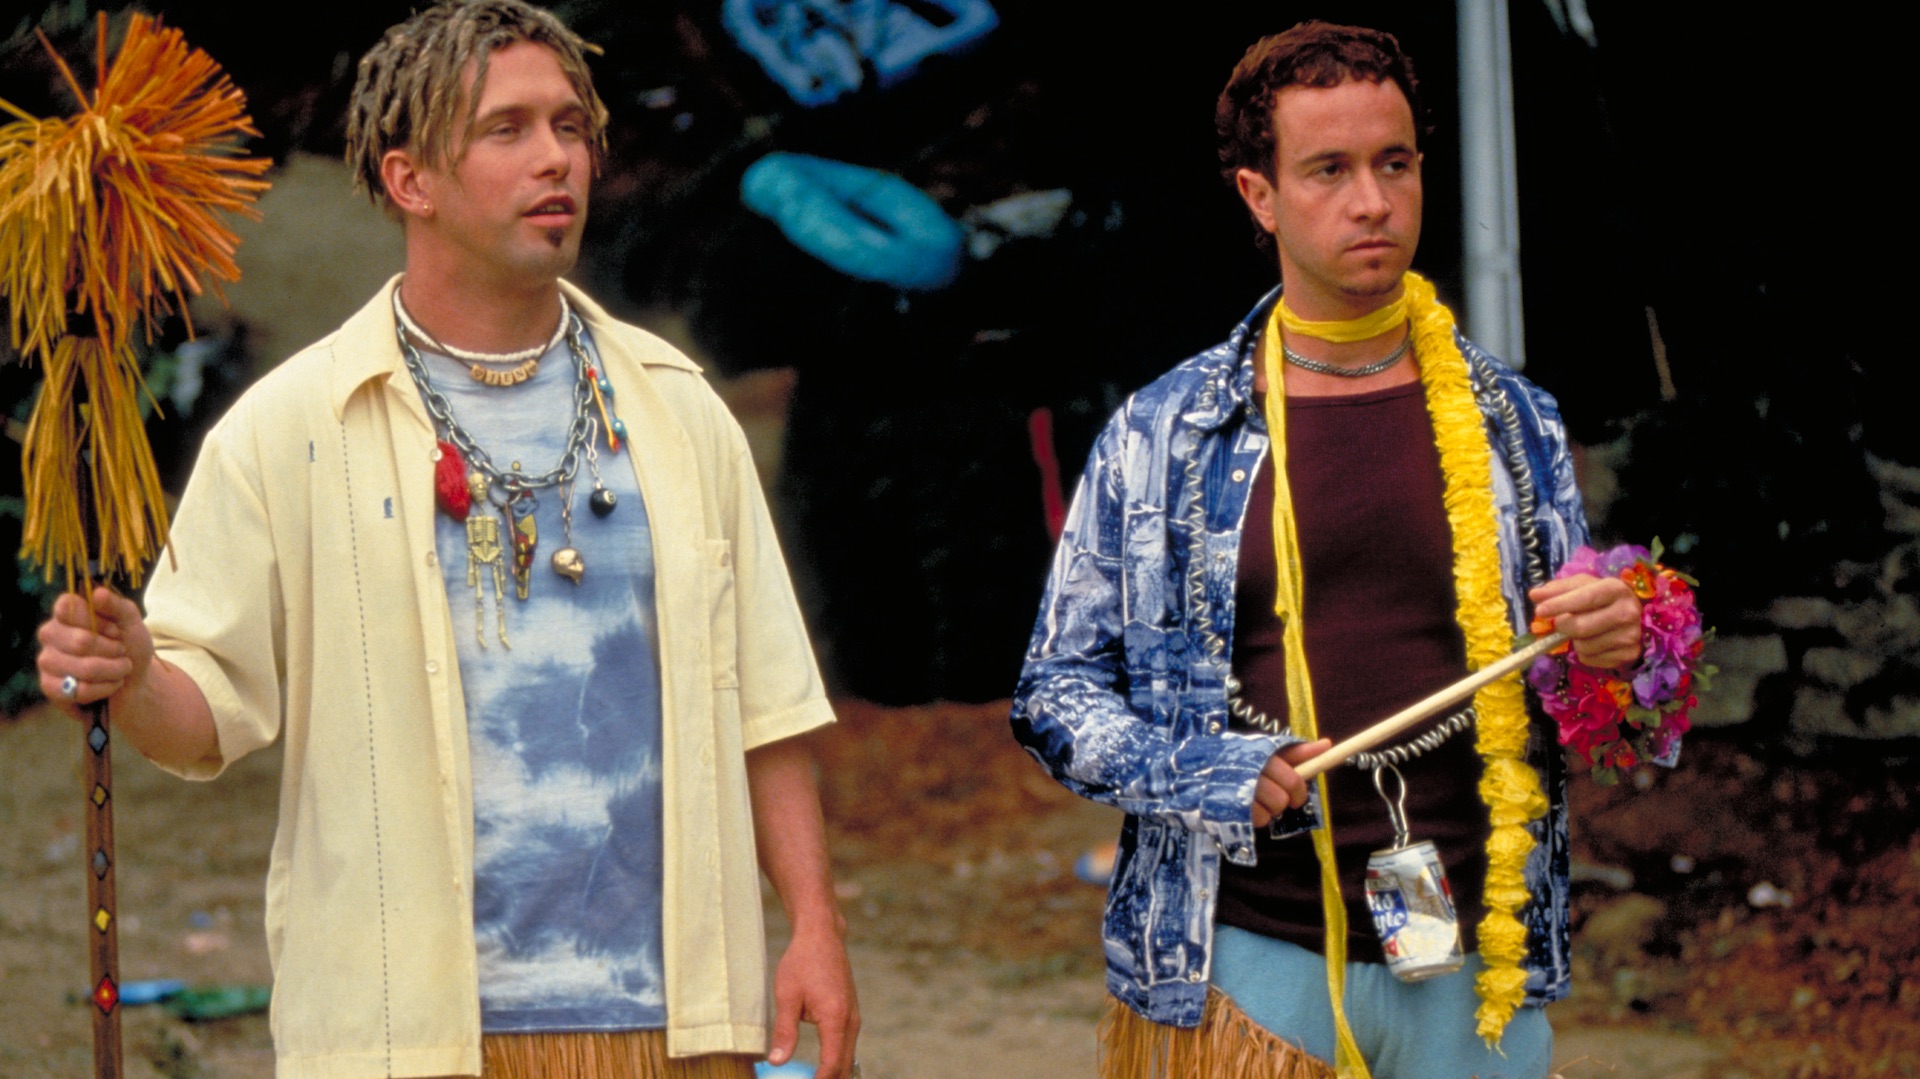 Stephen Baldwin and Pauly Shore in Bio-Dome (1996) ... Alec Baldwin told his brother, Stephen Baldwin, that doing this movie could end his acting career.